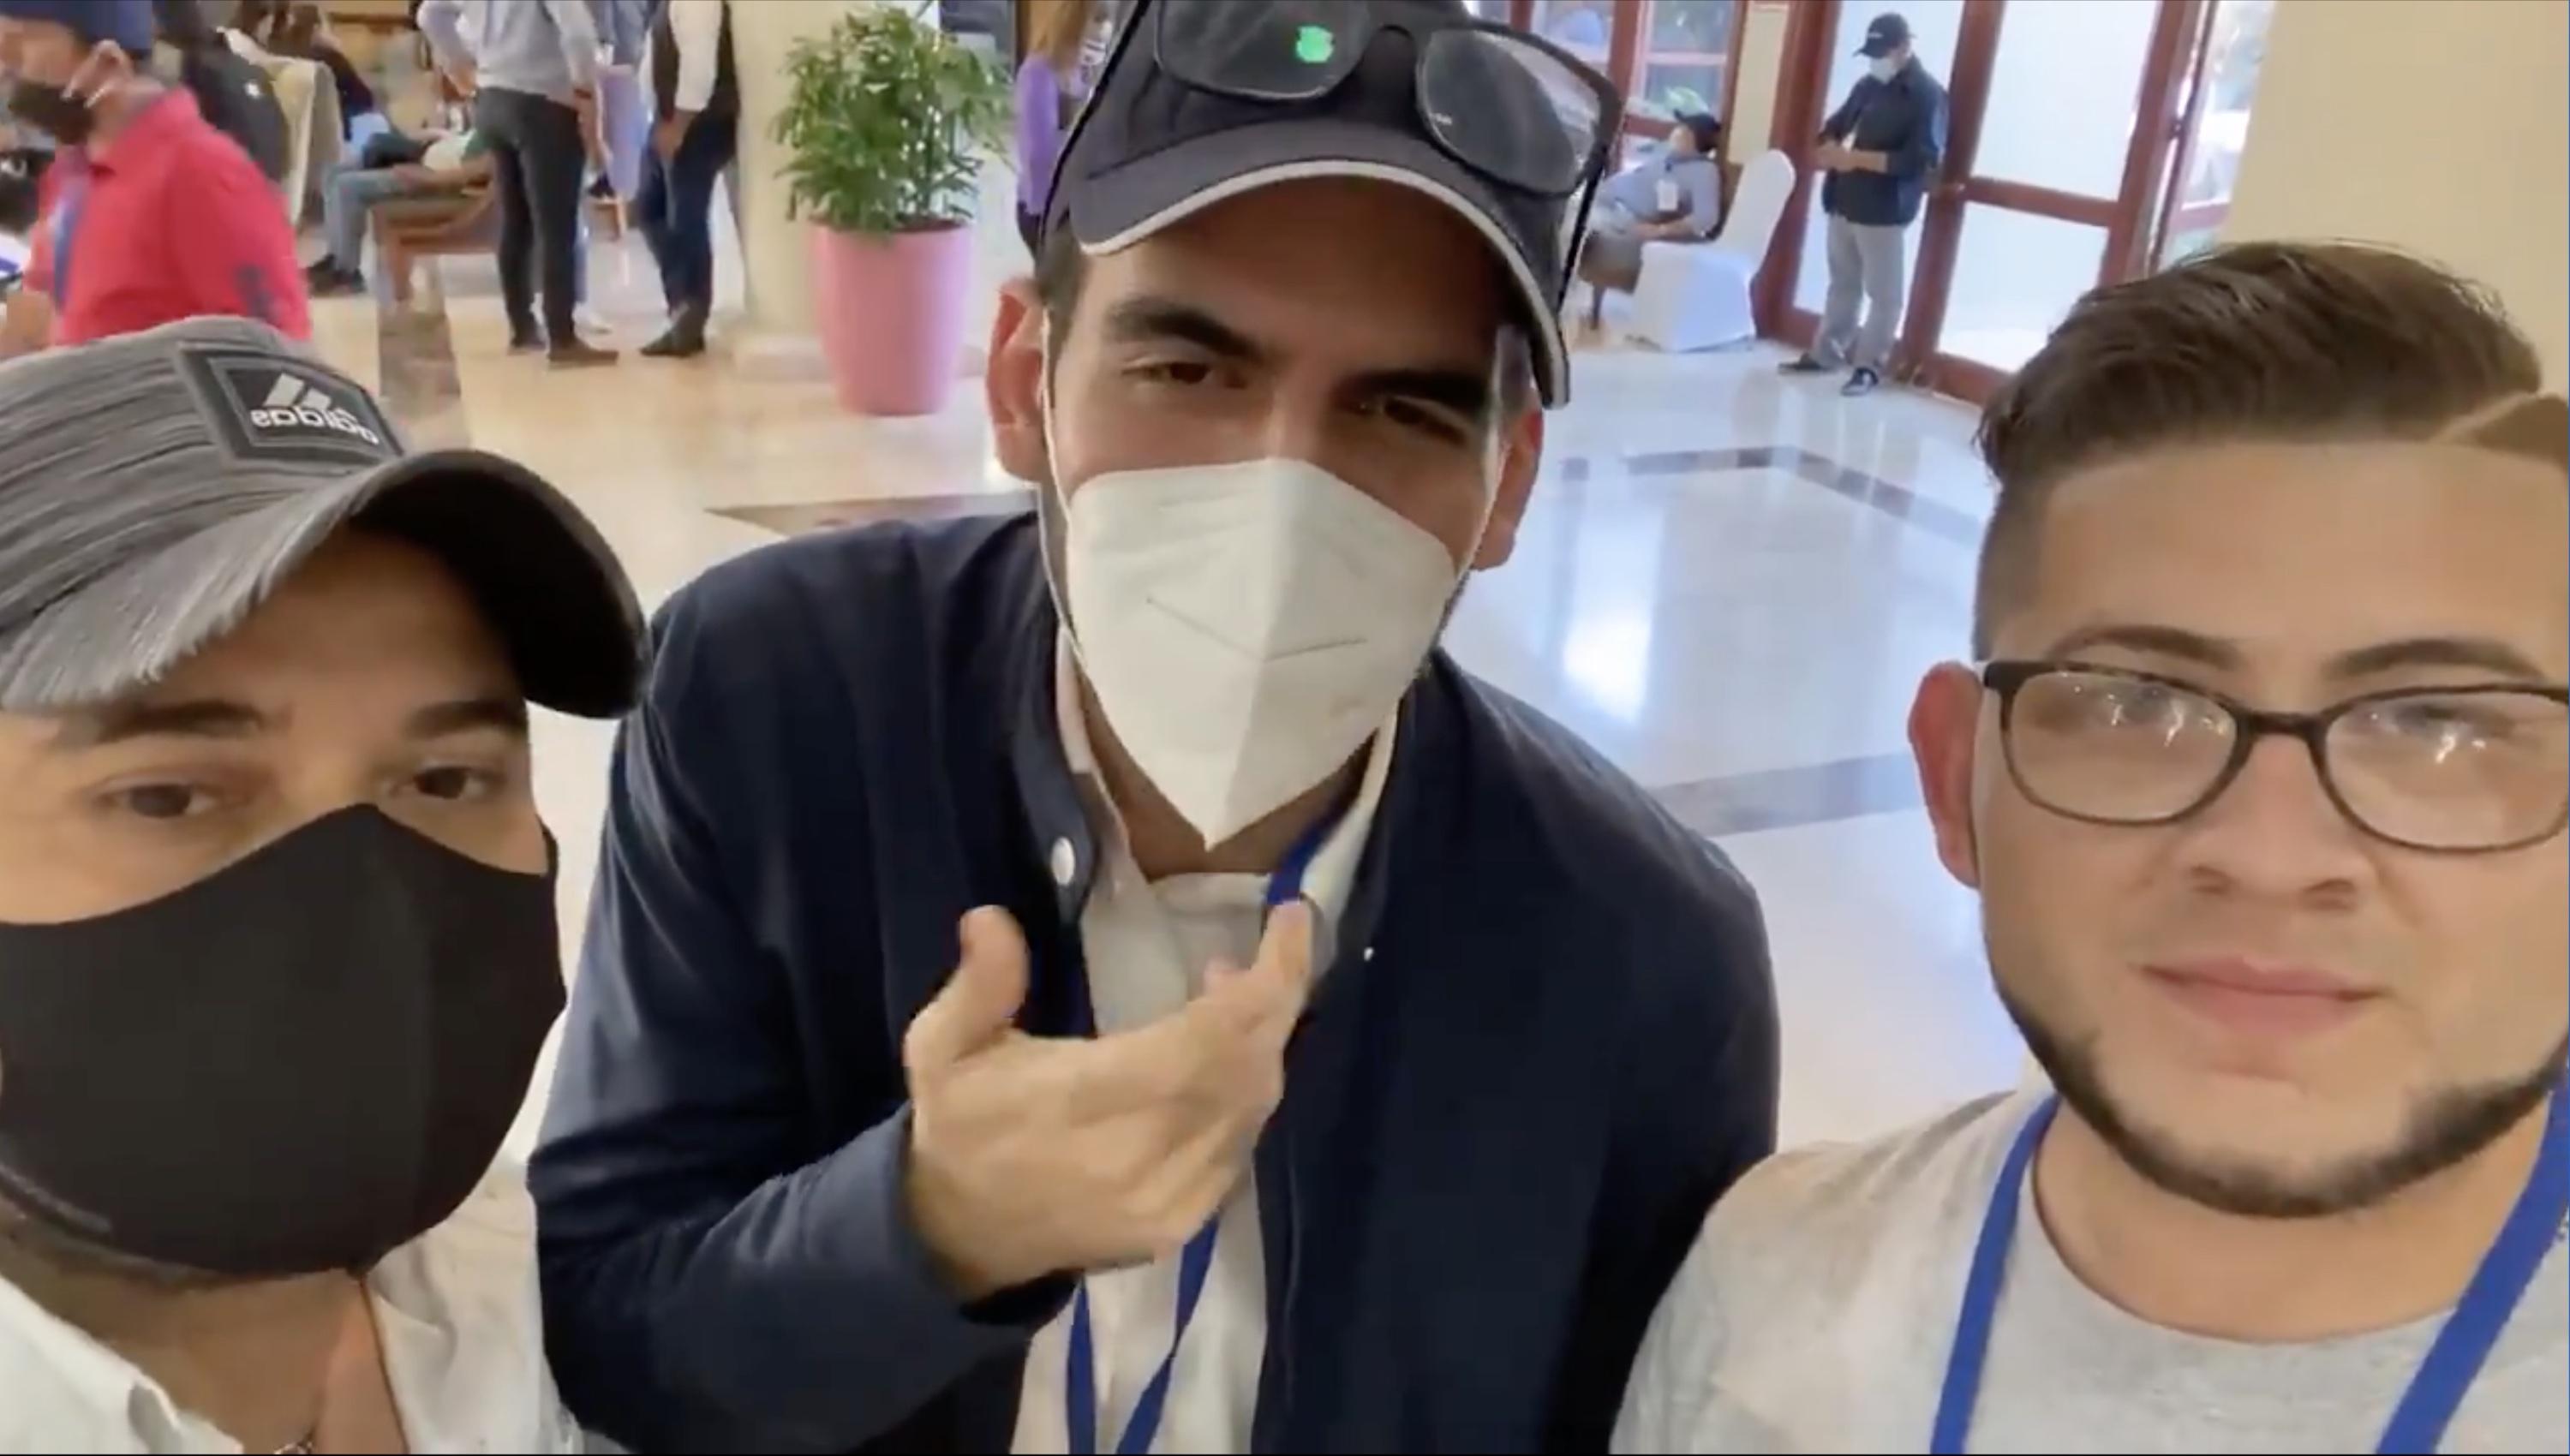 Karim Bukele (center) poses with YouTuber Christian de la O (right) in the hotel where the vote count of the 2021 elections took place, on March 4, 2021. Photo: Christian de la O/Twitter.